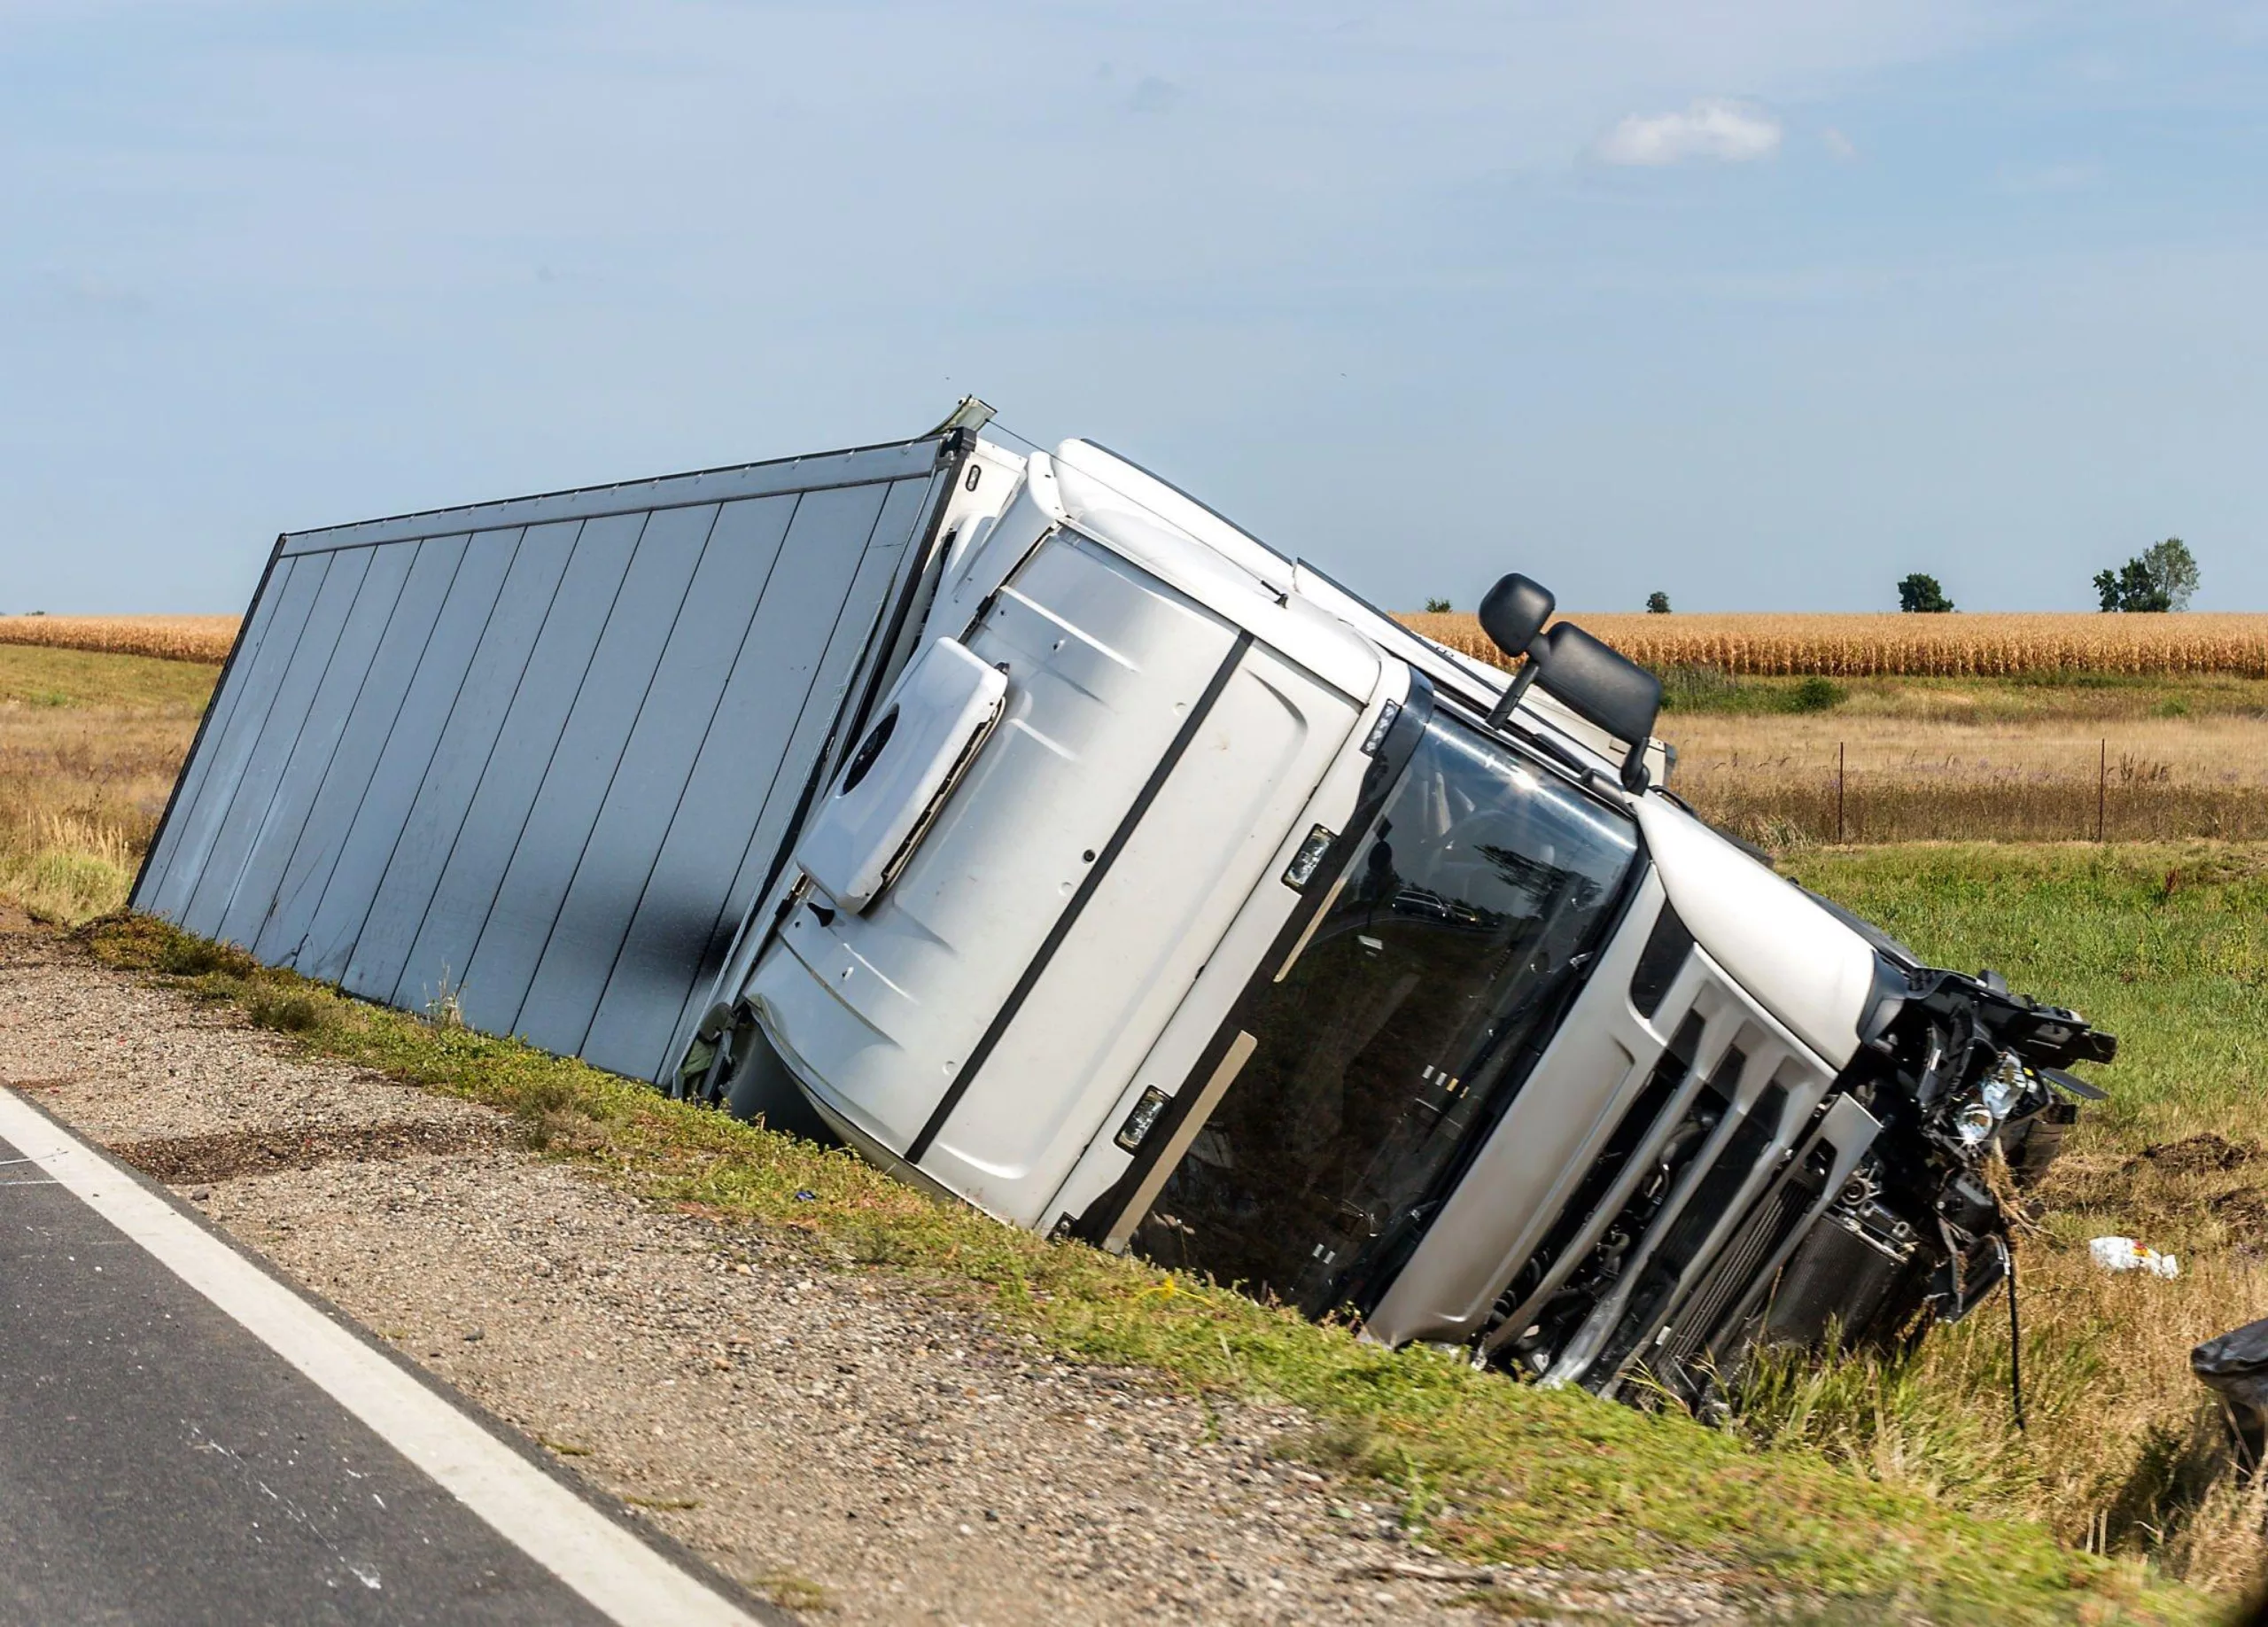 Truck accident Lawyer